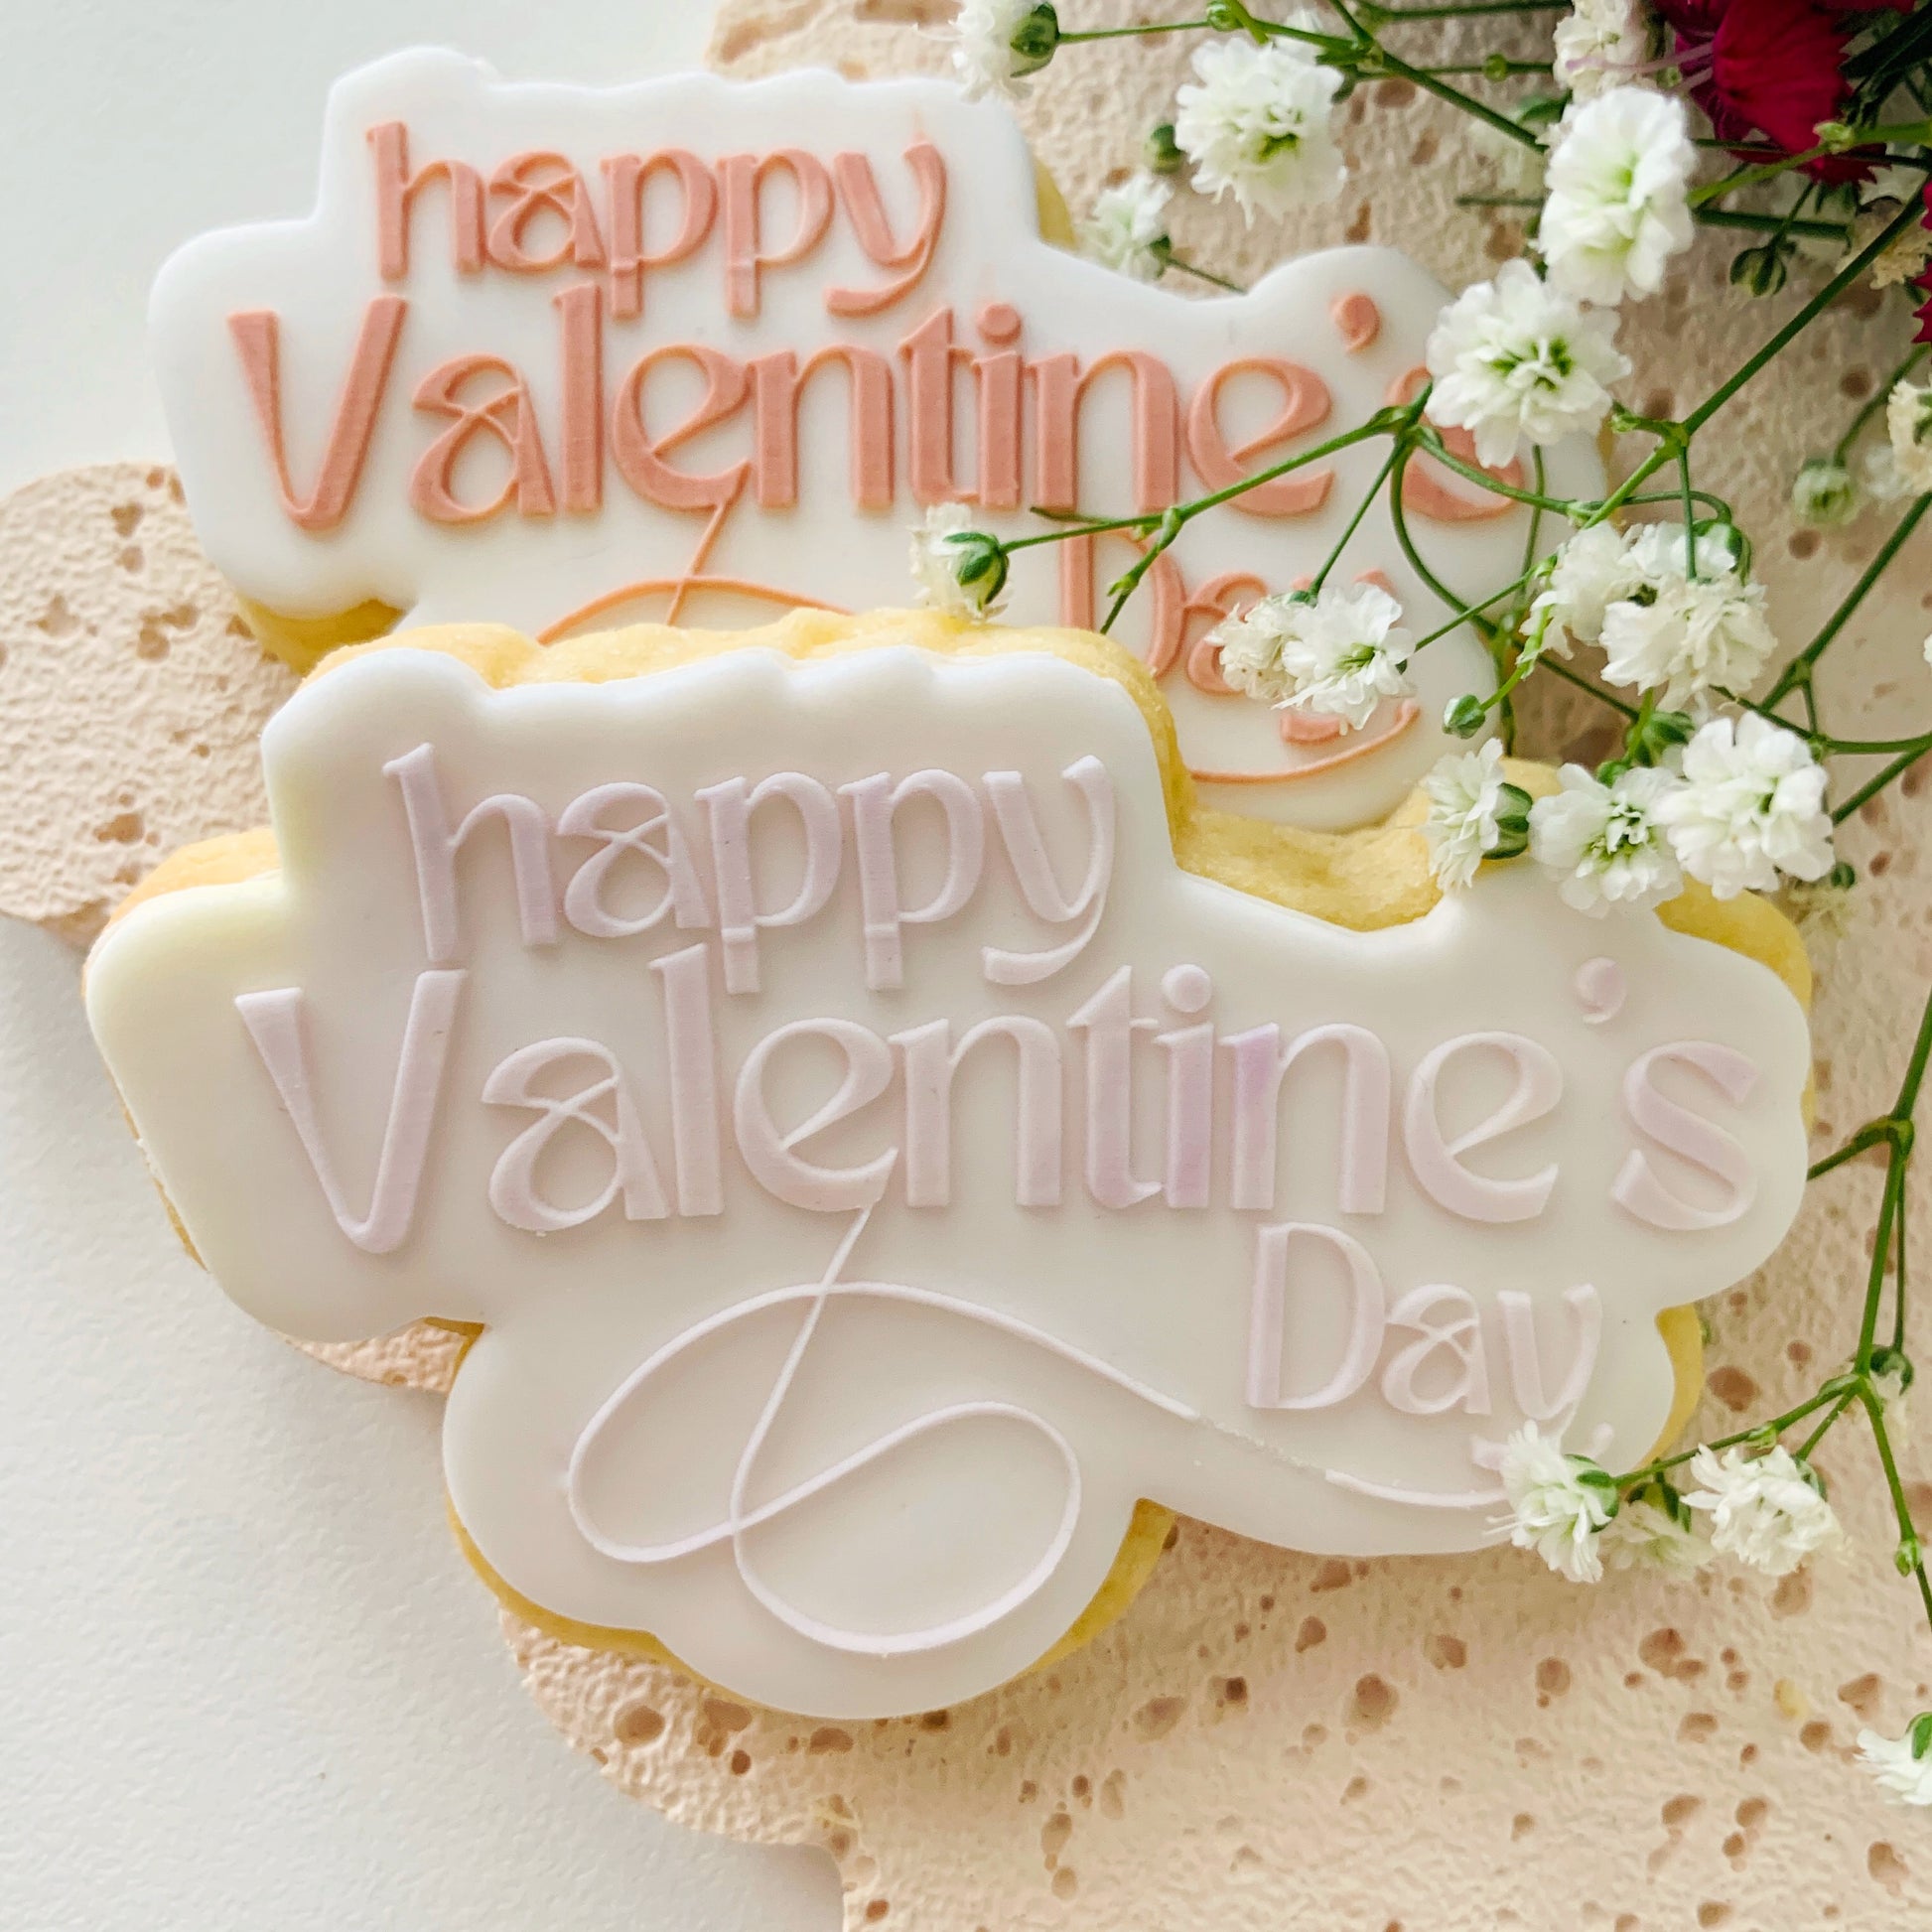 Happy Valentines Day 227-151 Cookie Cutter and Acrylic Stamp